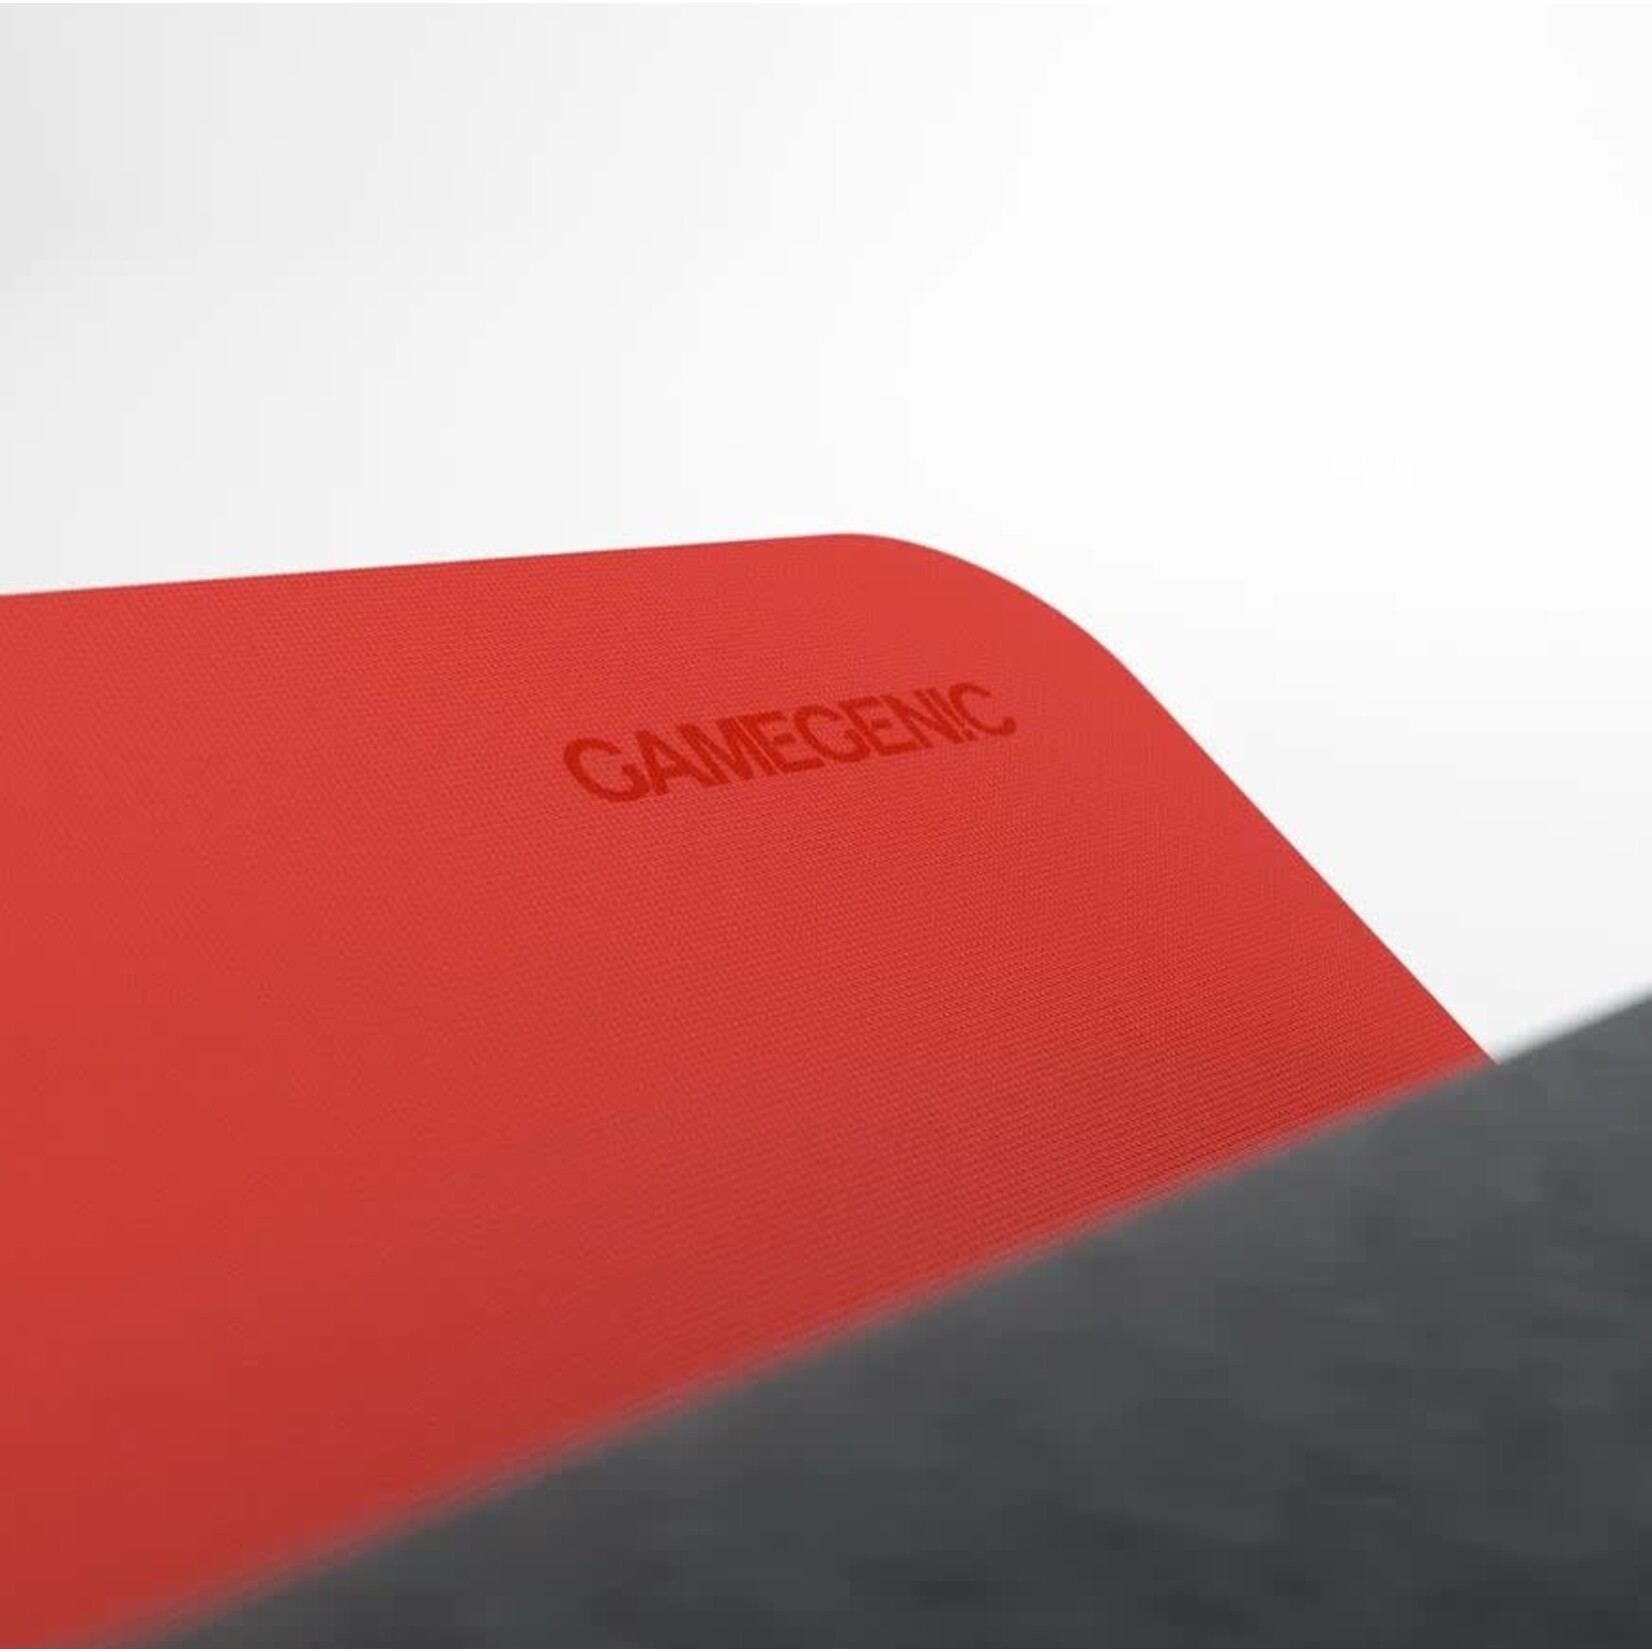 Gamegenic Prime Playmat: Red